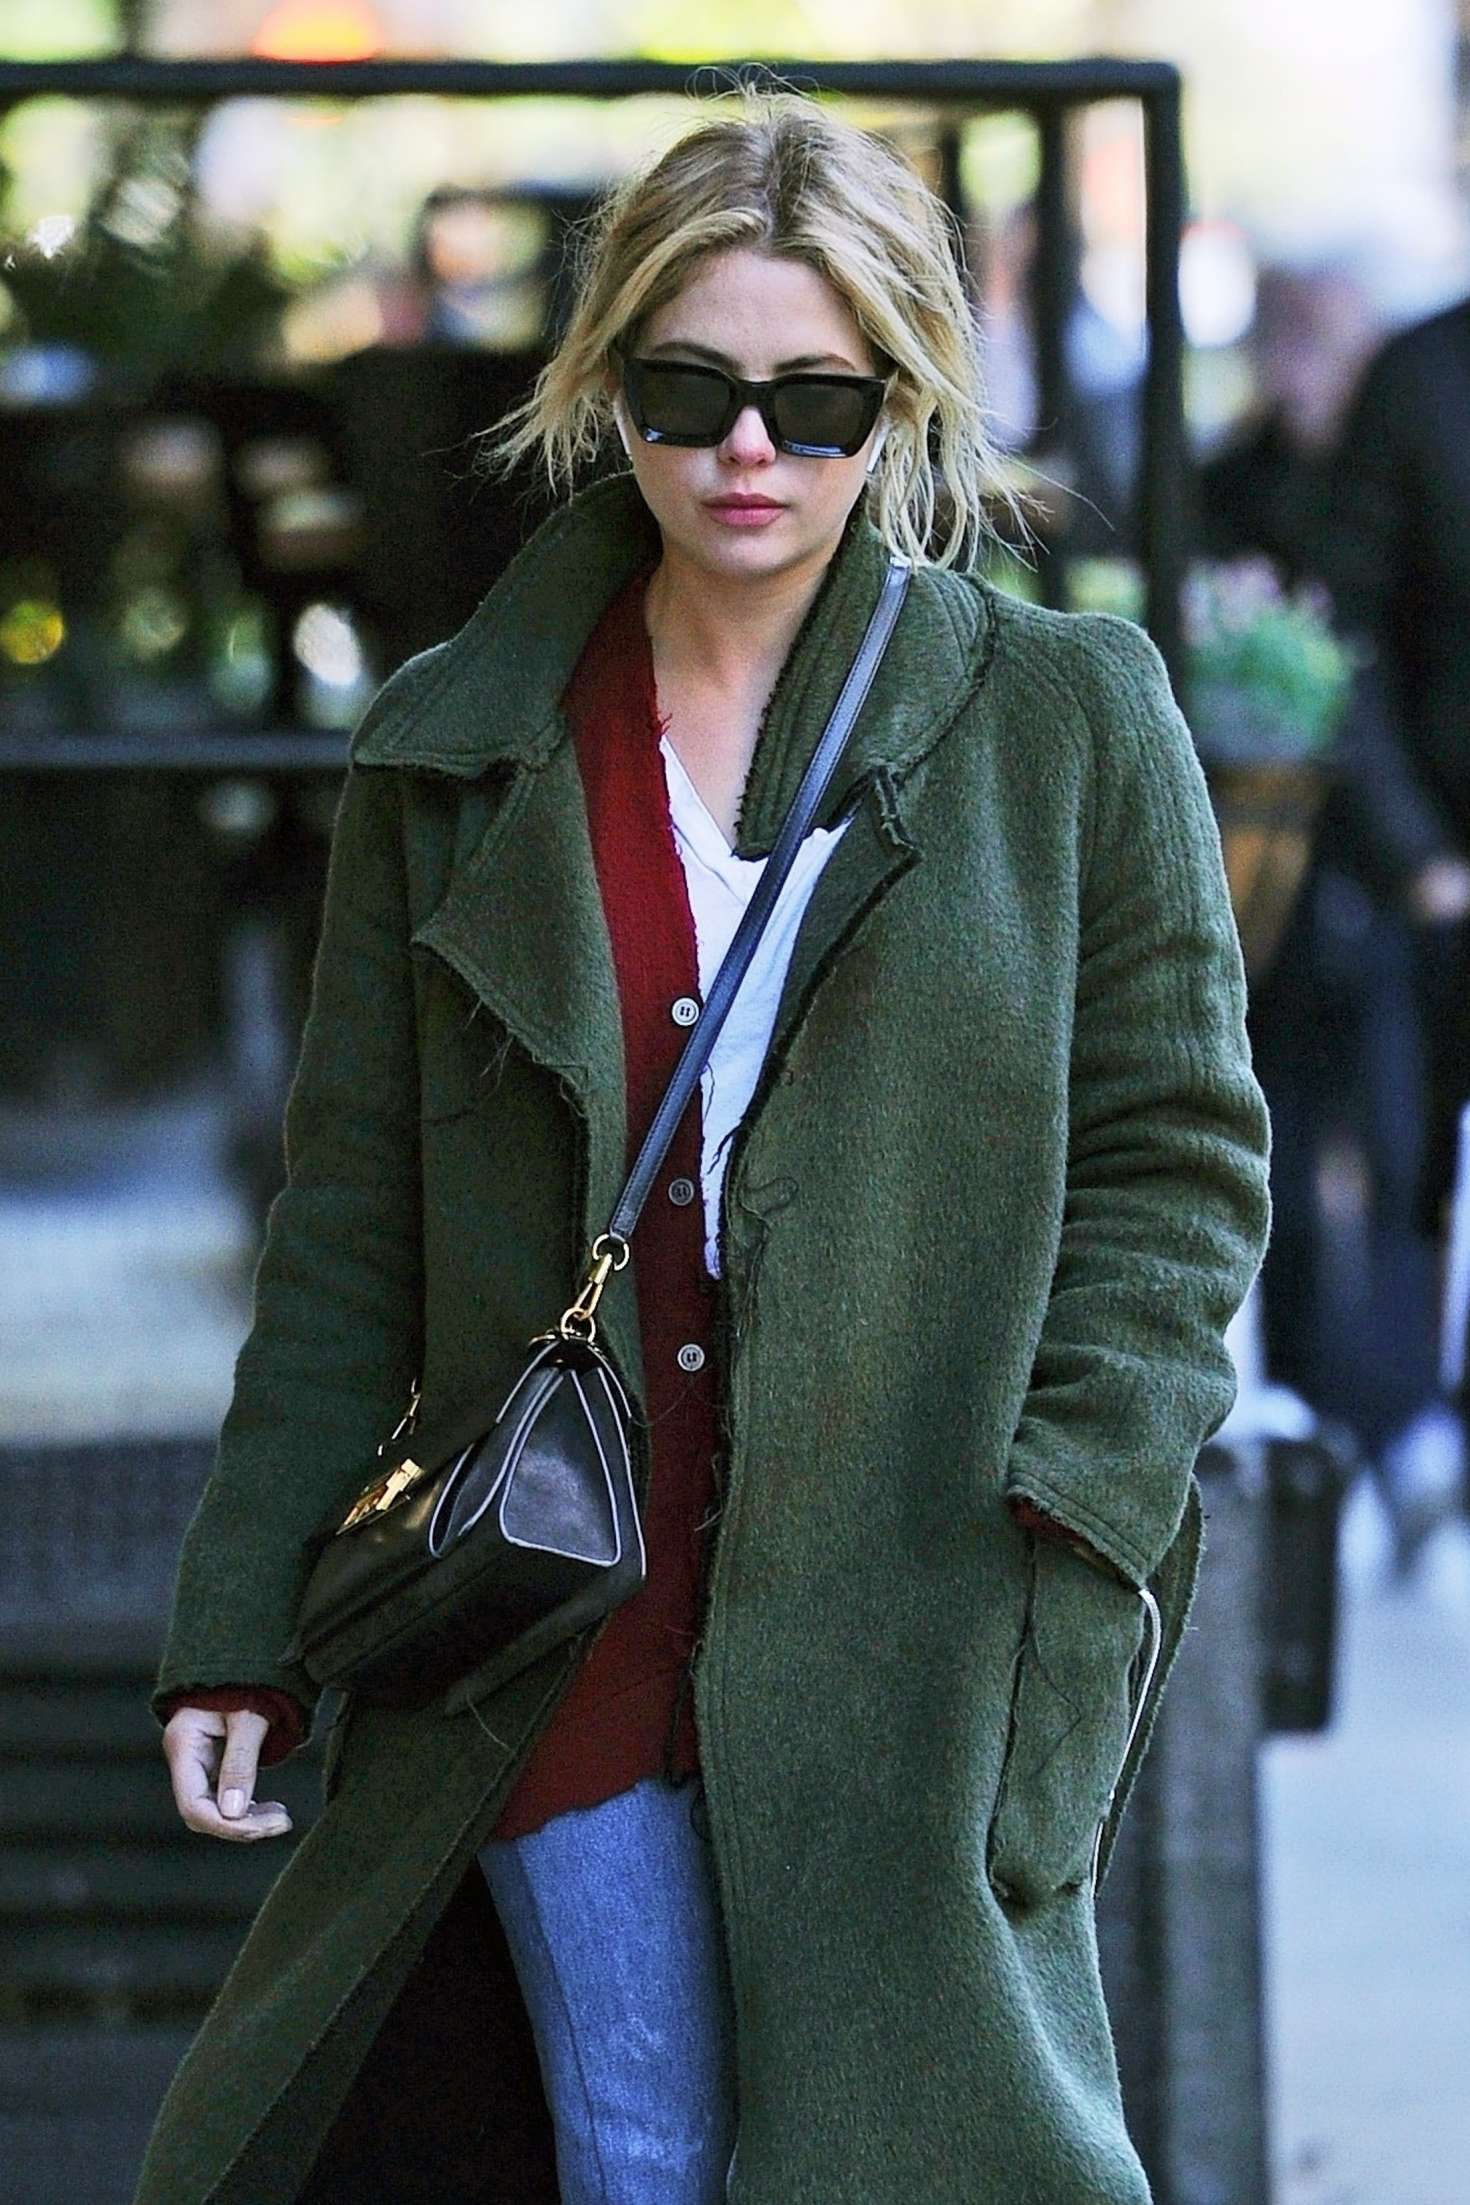 Ashley Benson in Long Coat - Out and about in NYC